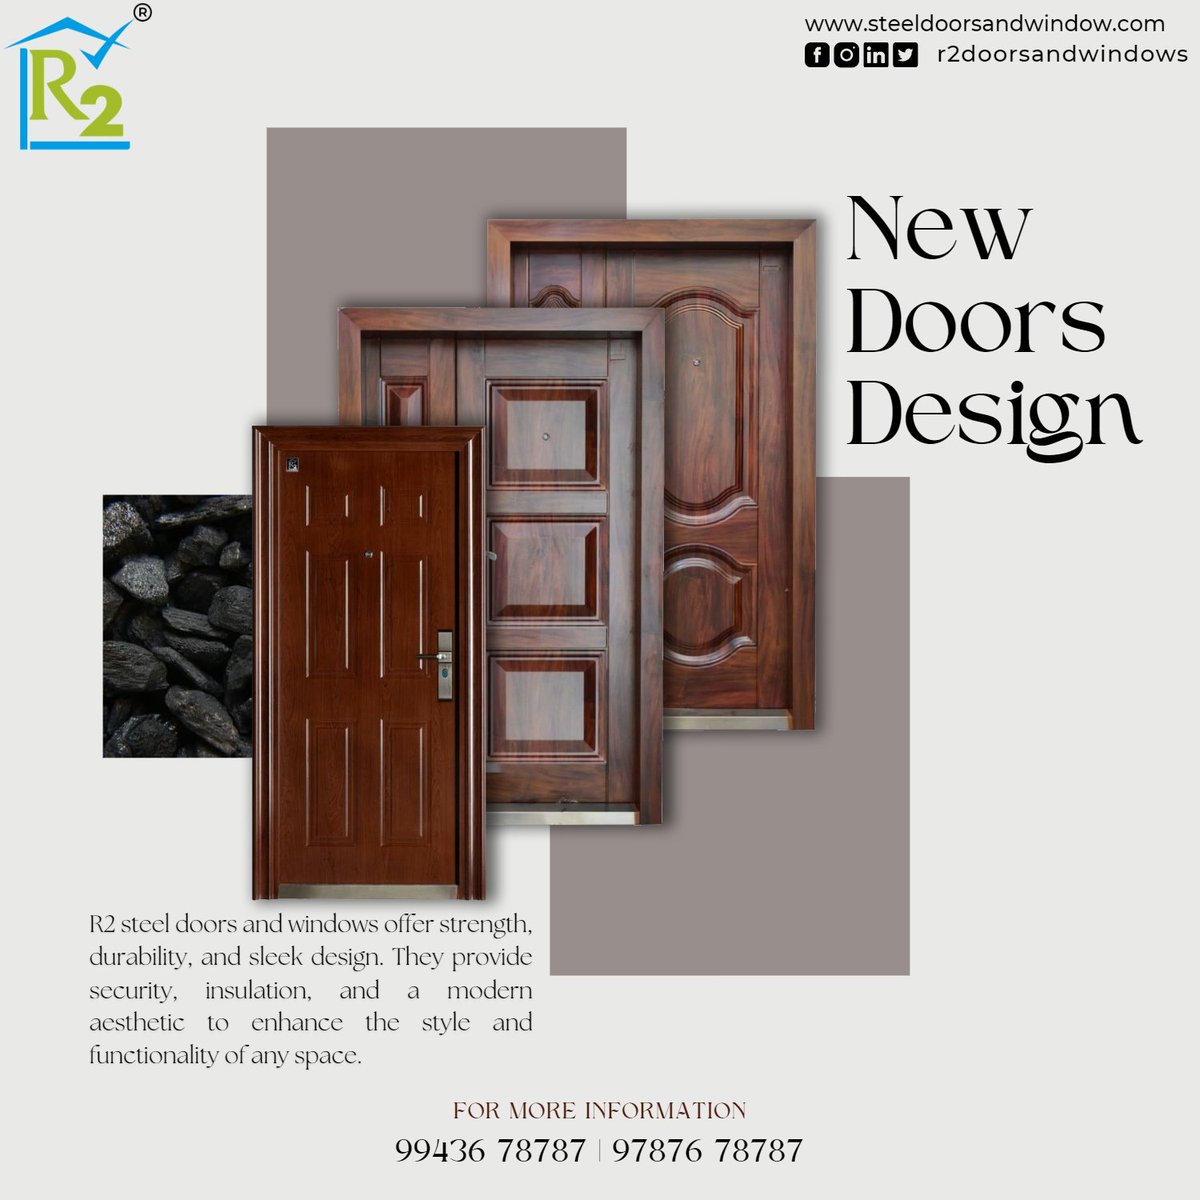 New Doors Design
R2 steel doors and windows offer strength, durability, and sleek design. They provide security, insulation, and a modern aesthetic to enhance the style and functionality of any space.

#sathishdeepa #deepasathish #sathishkumardsatz #satz #R2 #steel #savetrees